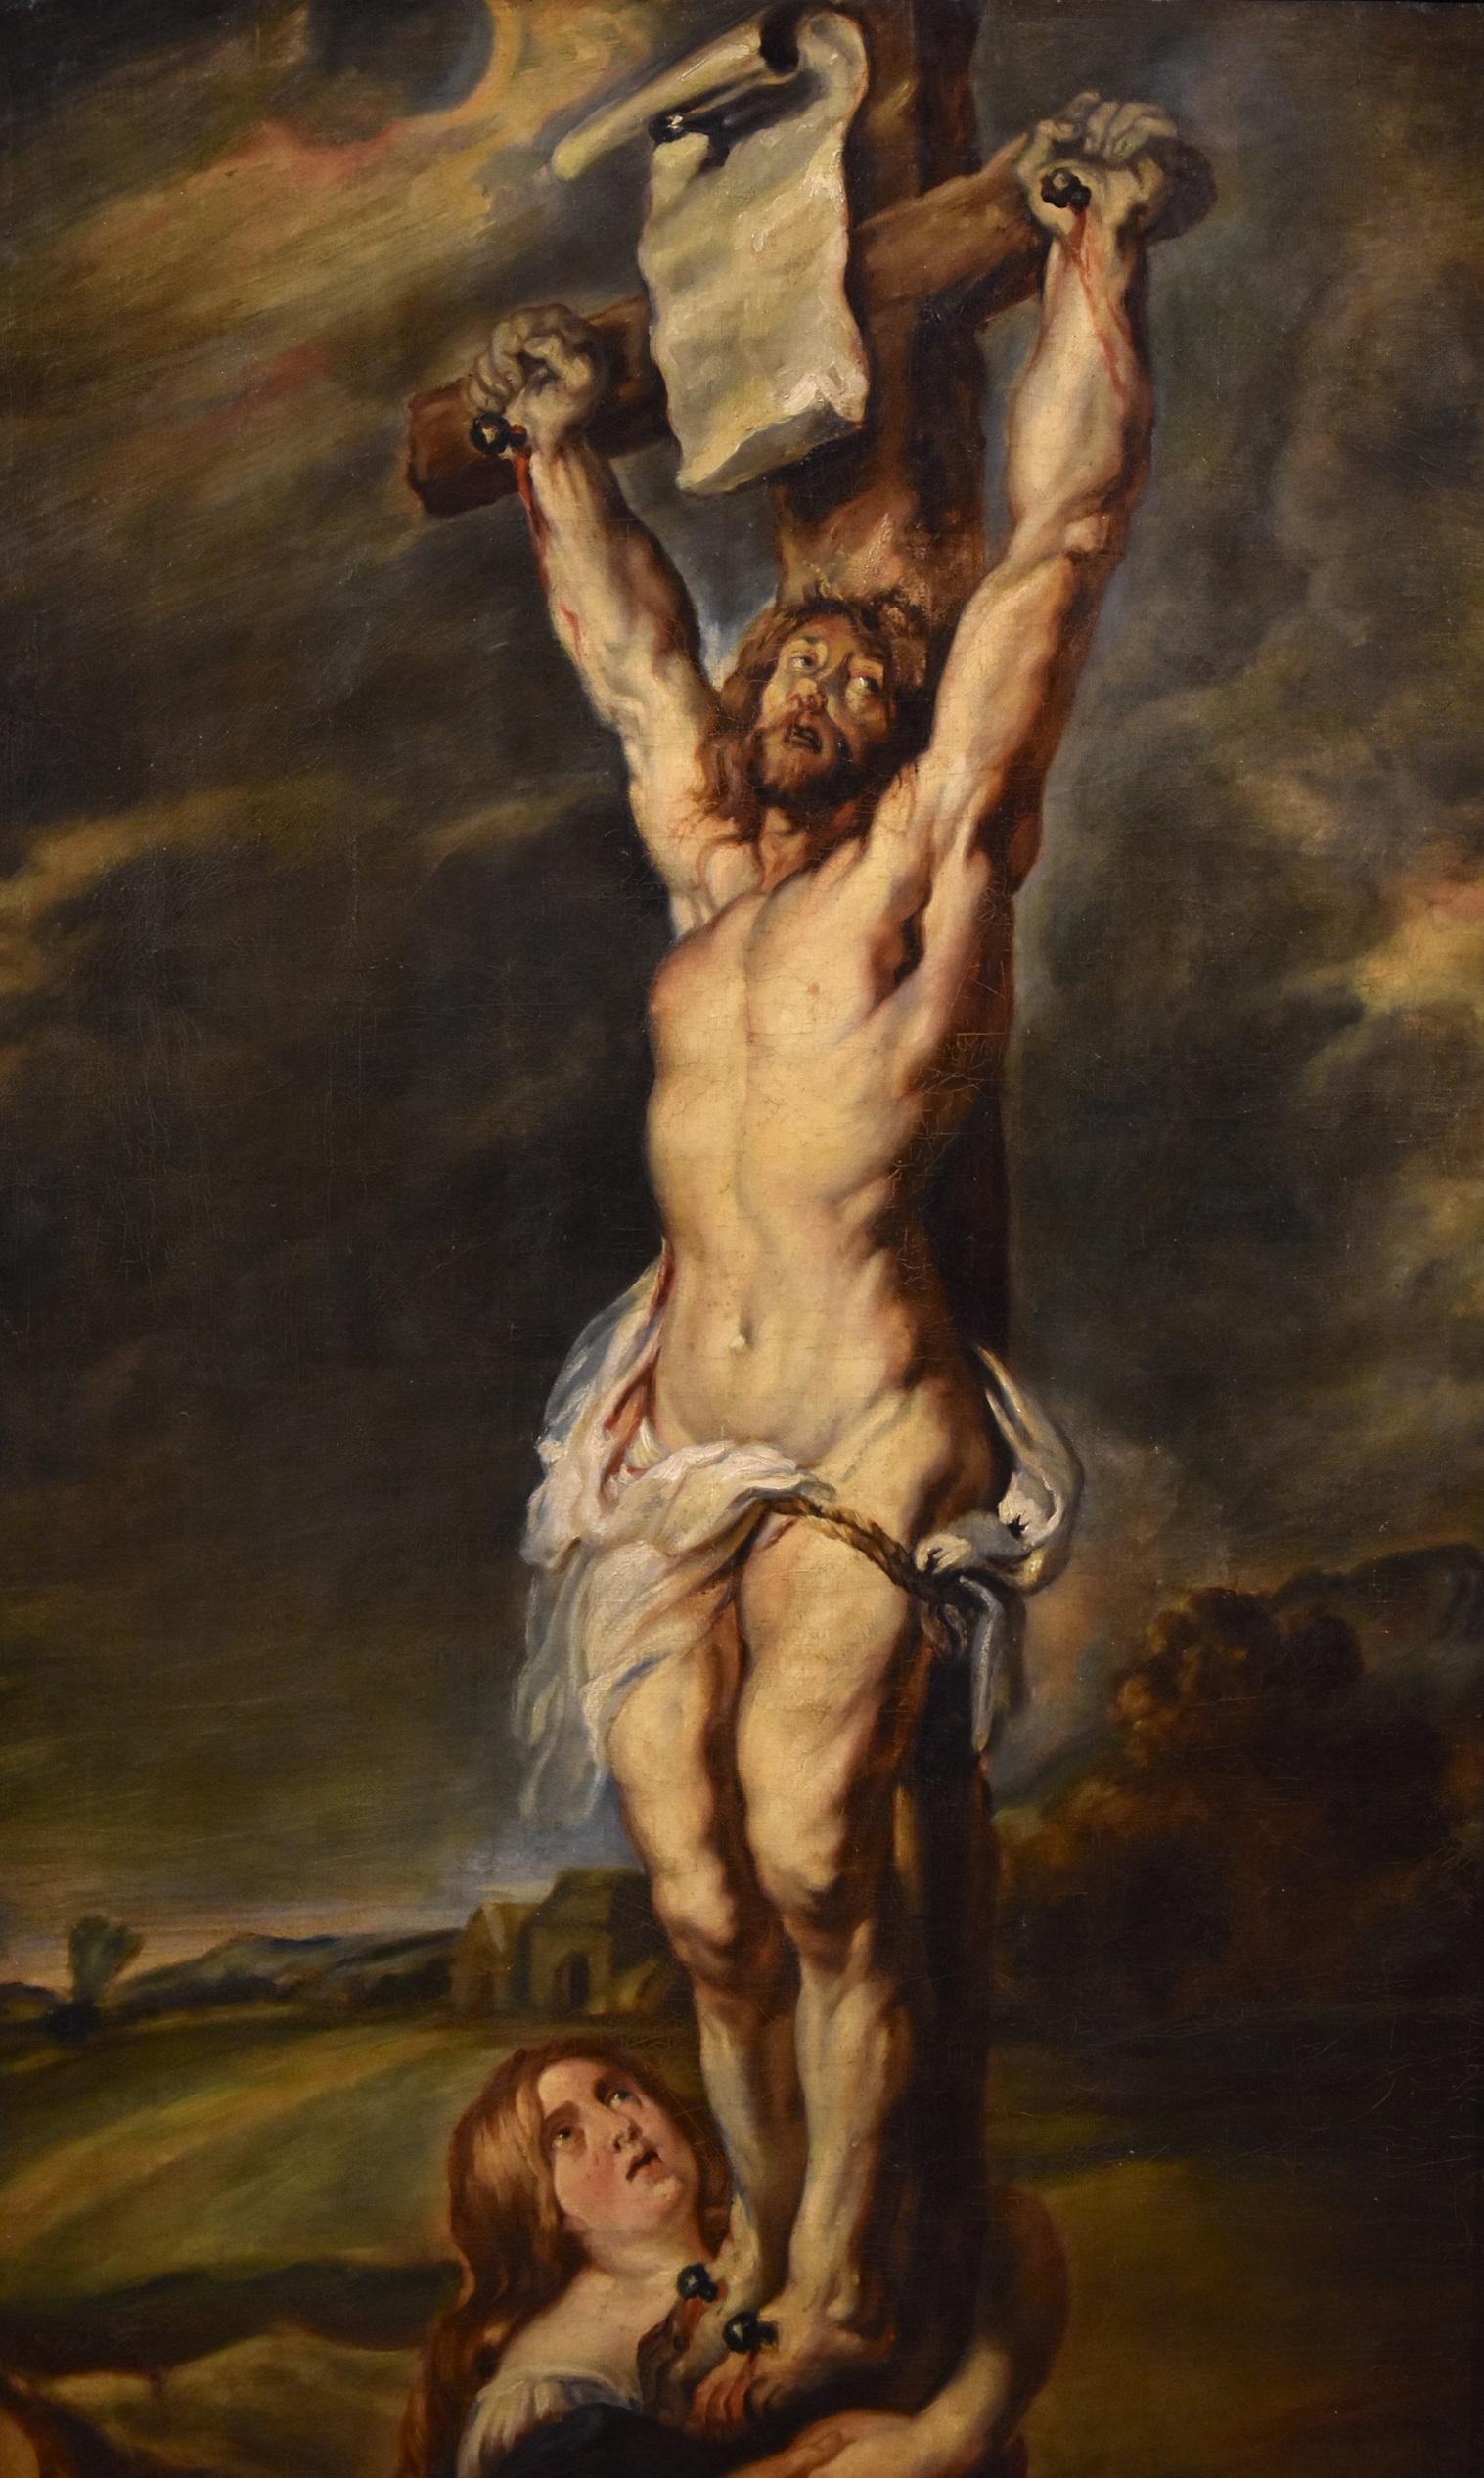 Christ Crucified Rubens Paint Oil on canvas Old master 17th Century Religious For Sale 7